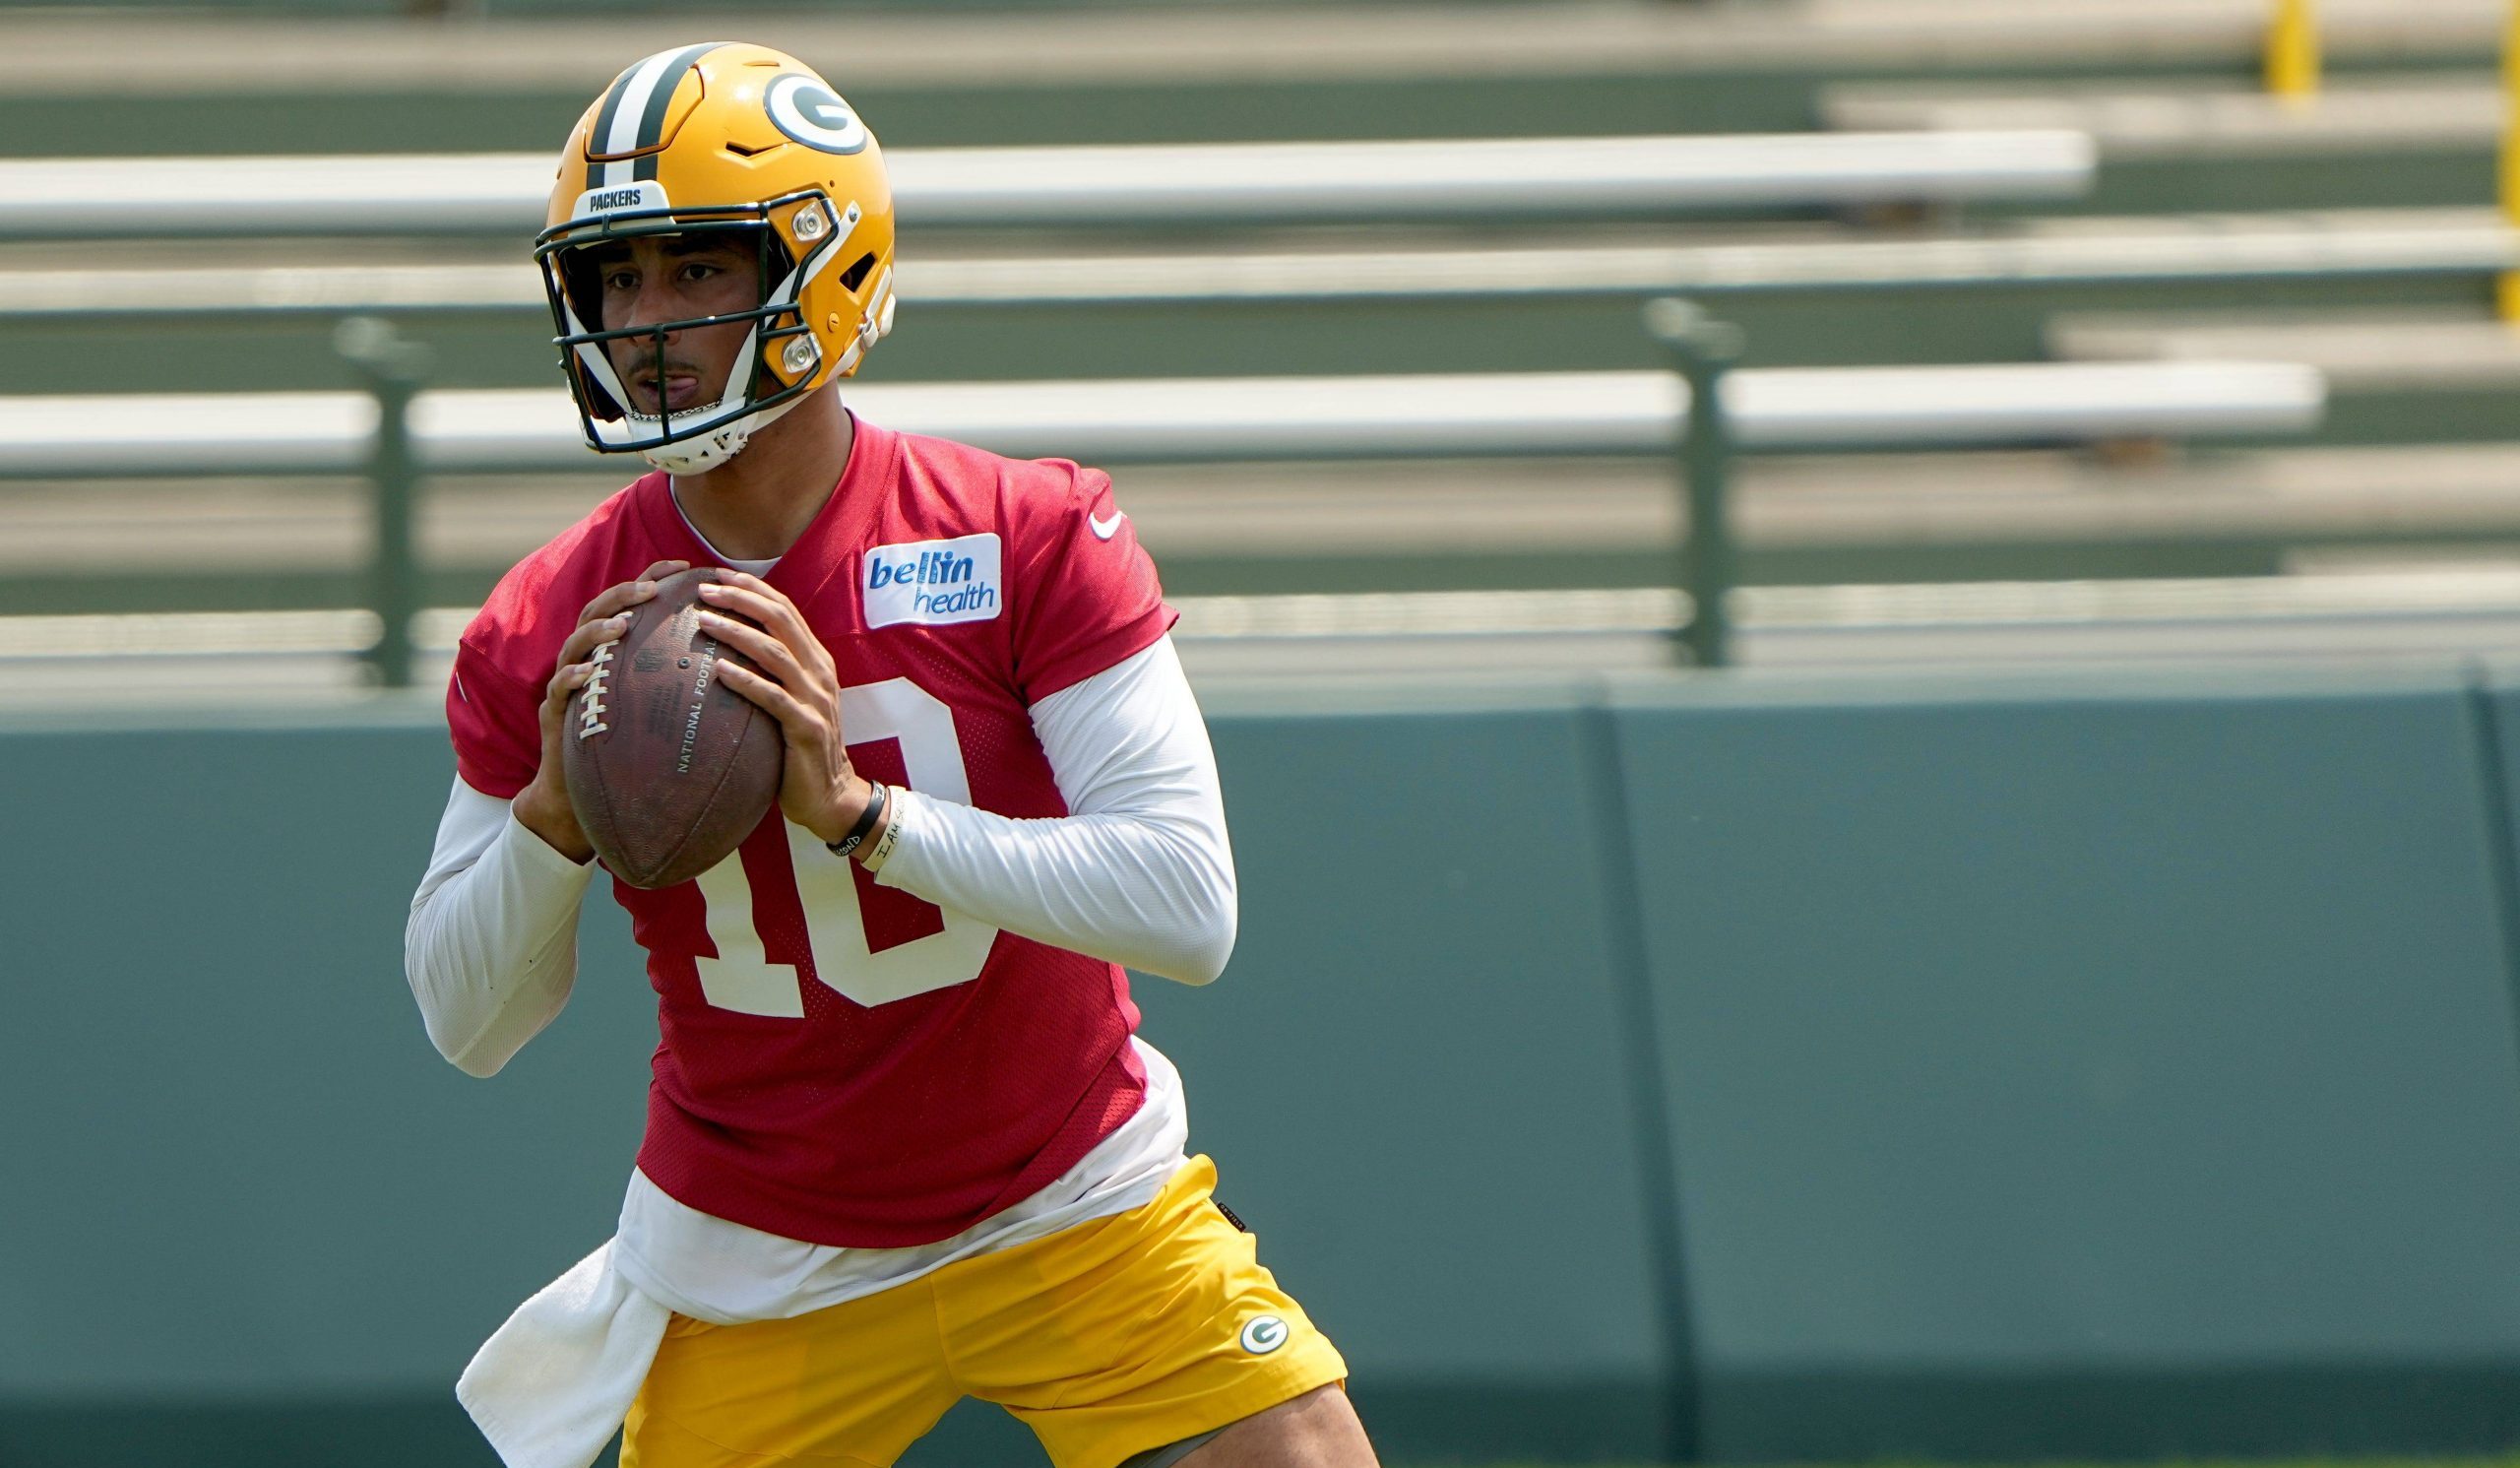 Syndication: Journal Sentinel Green Bay Packers quarterback Jordan Love 10 is shown during organized team activities Tuesday, May 23, 2023 in Green Bay, Wis. , EDITORIAL USE ONLY PUBLICATIONxINxGERxSUIxAUTxONLY Copyright: xMARKxHOFFMAN/MILWAUKEExJOURNALxSENTINELx 0257644707st